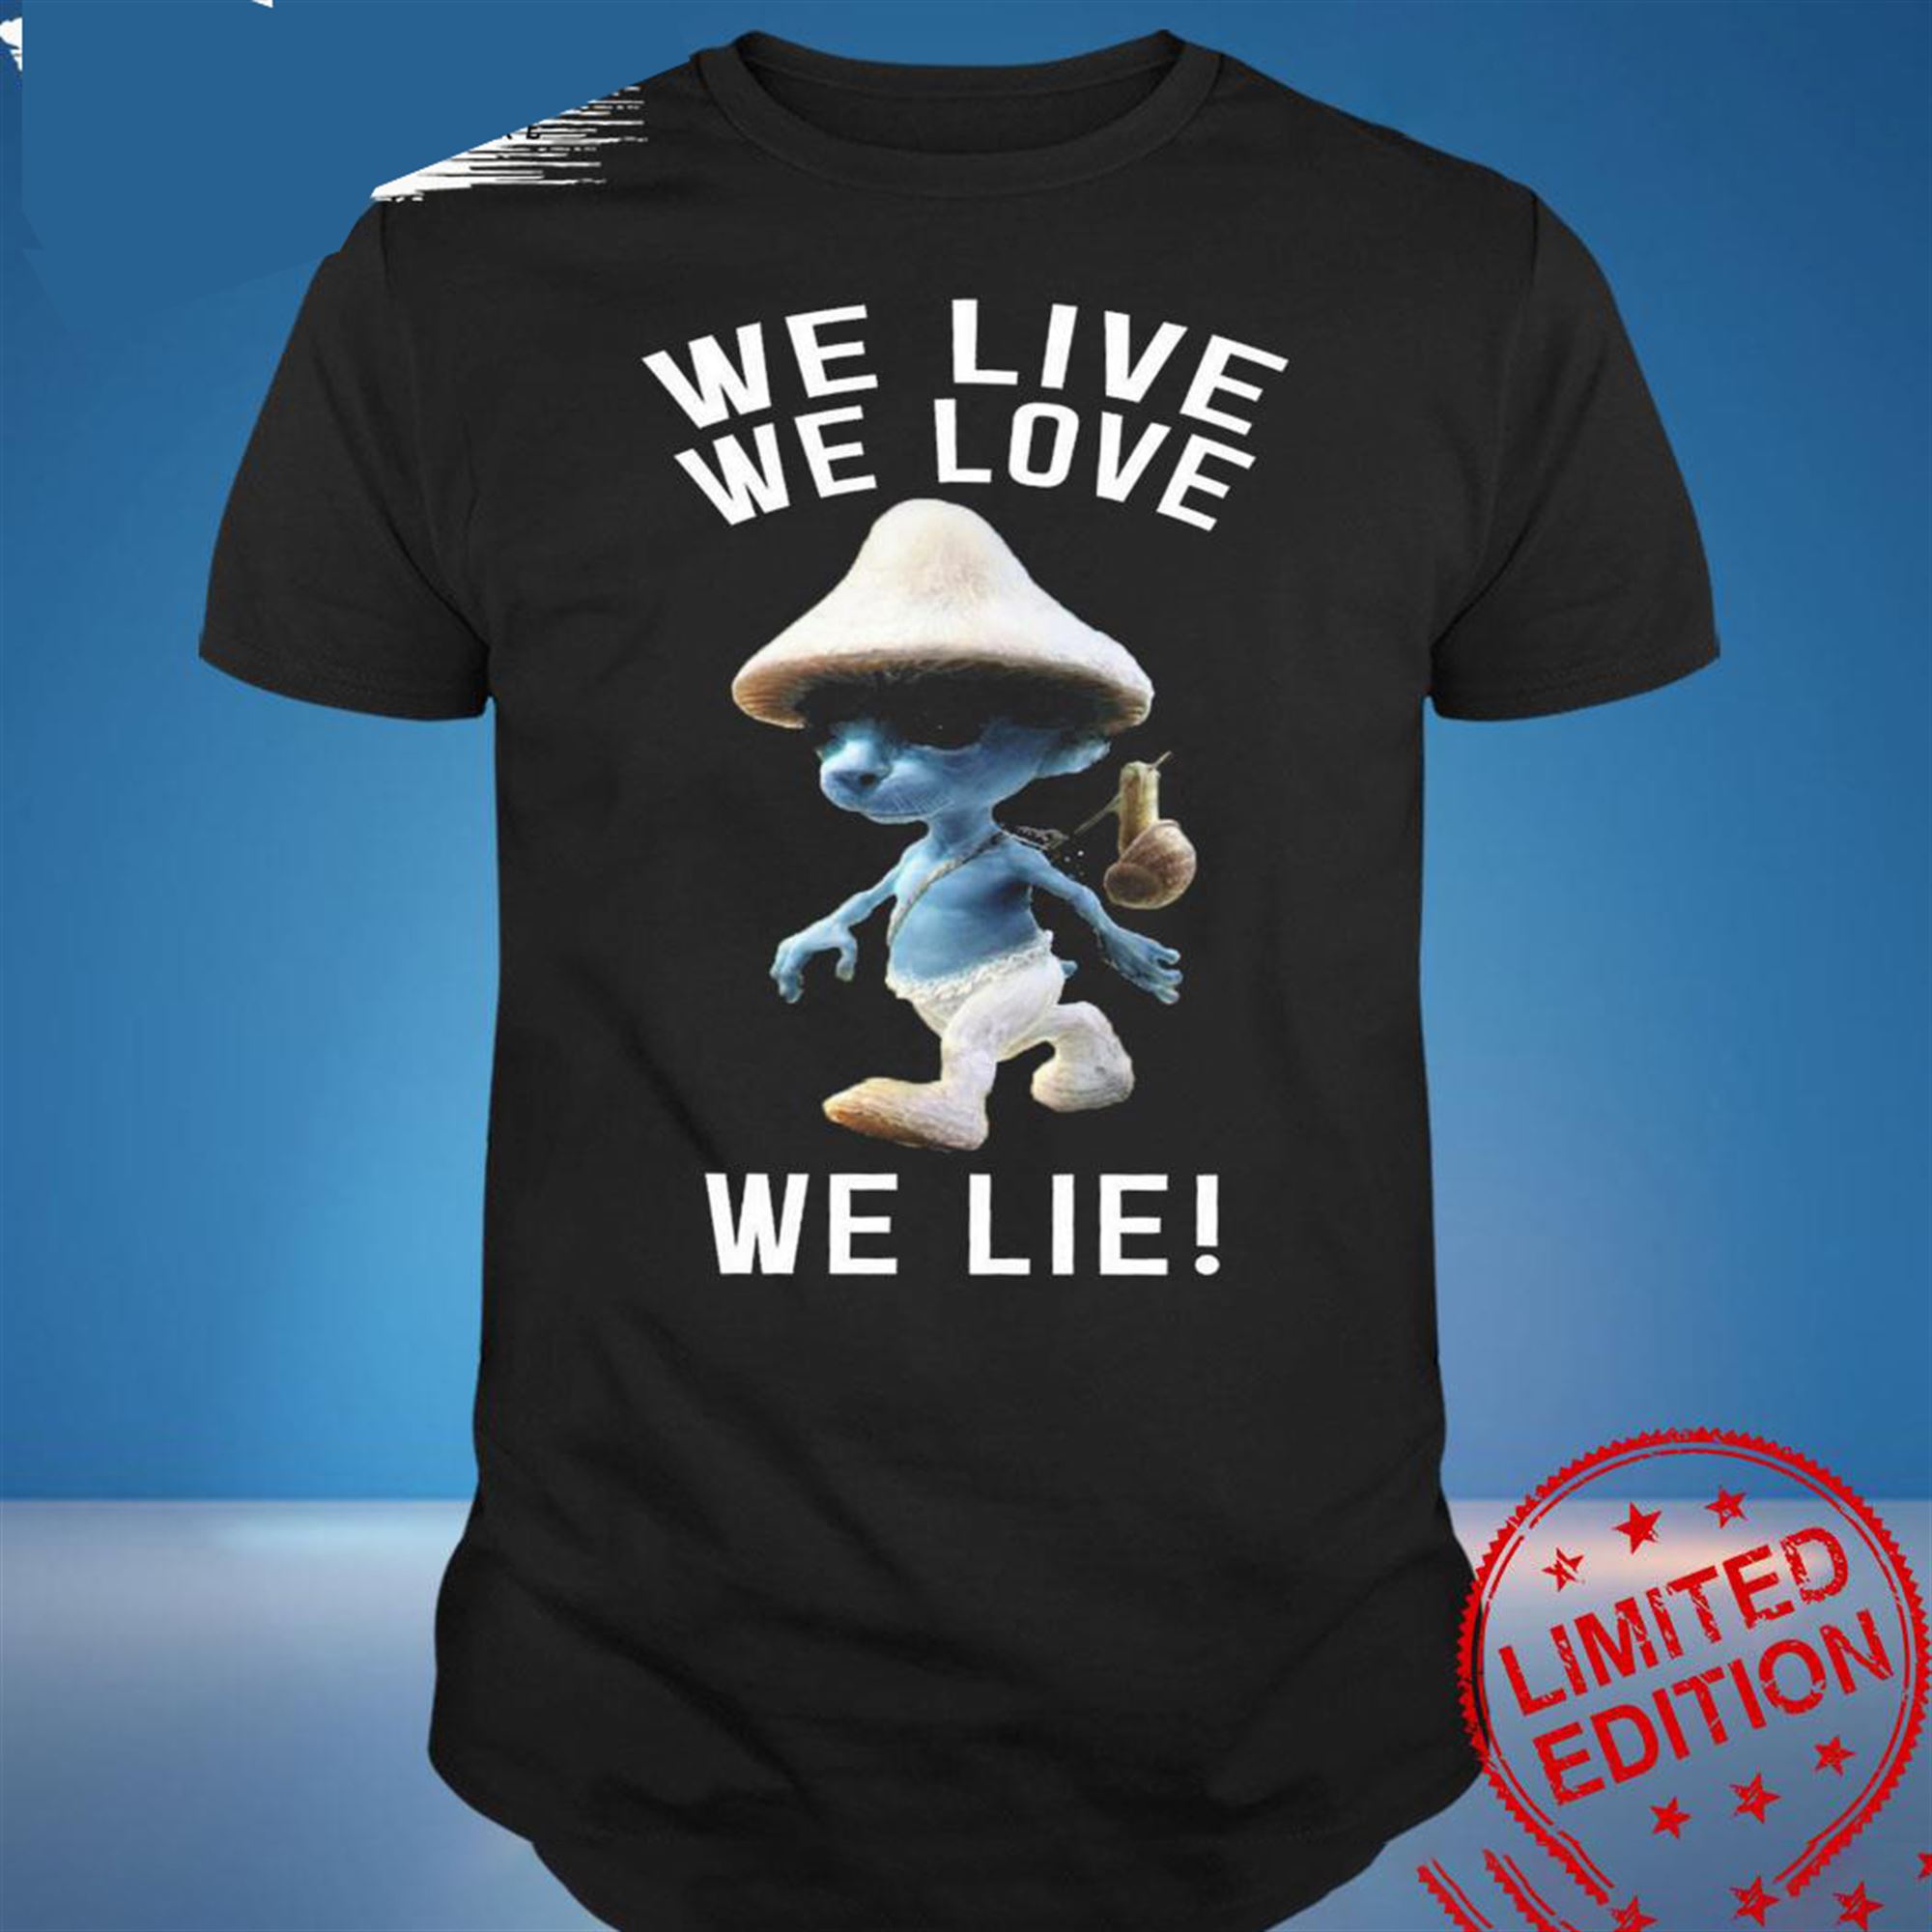 We Live We Love We Lie Cat Smurf Shirt Plus Size Up To 5xl